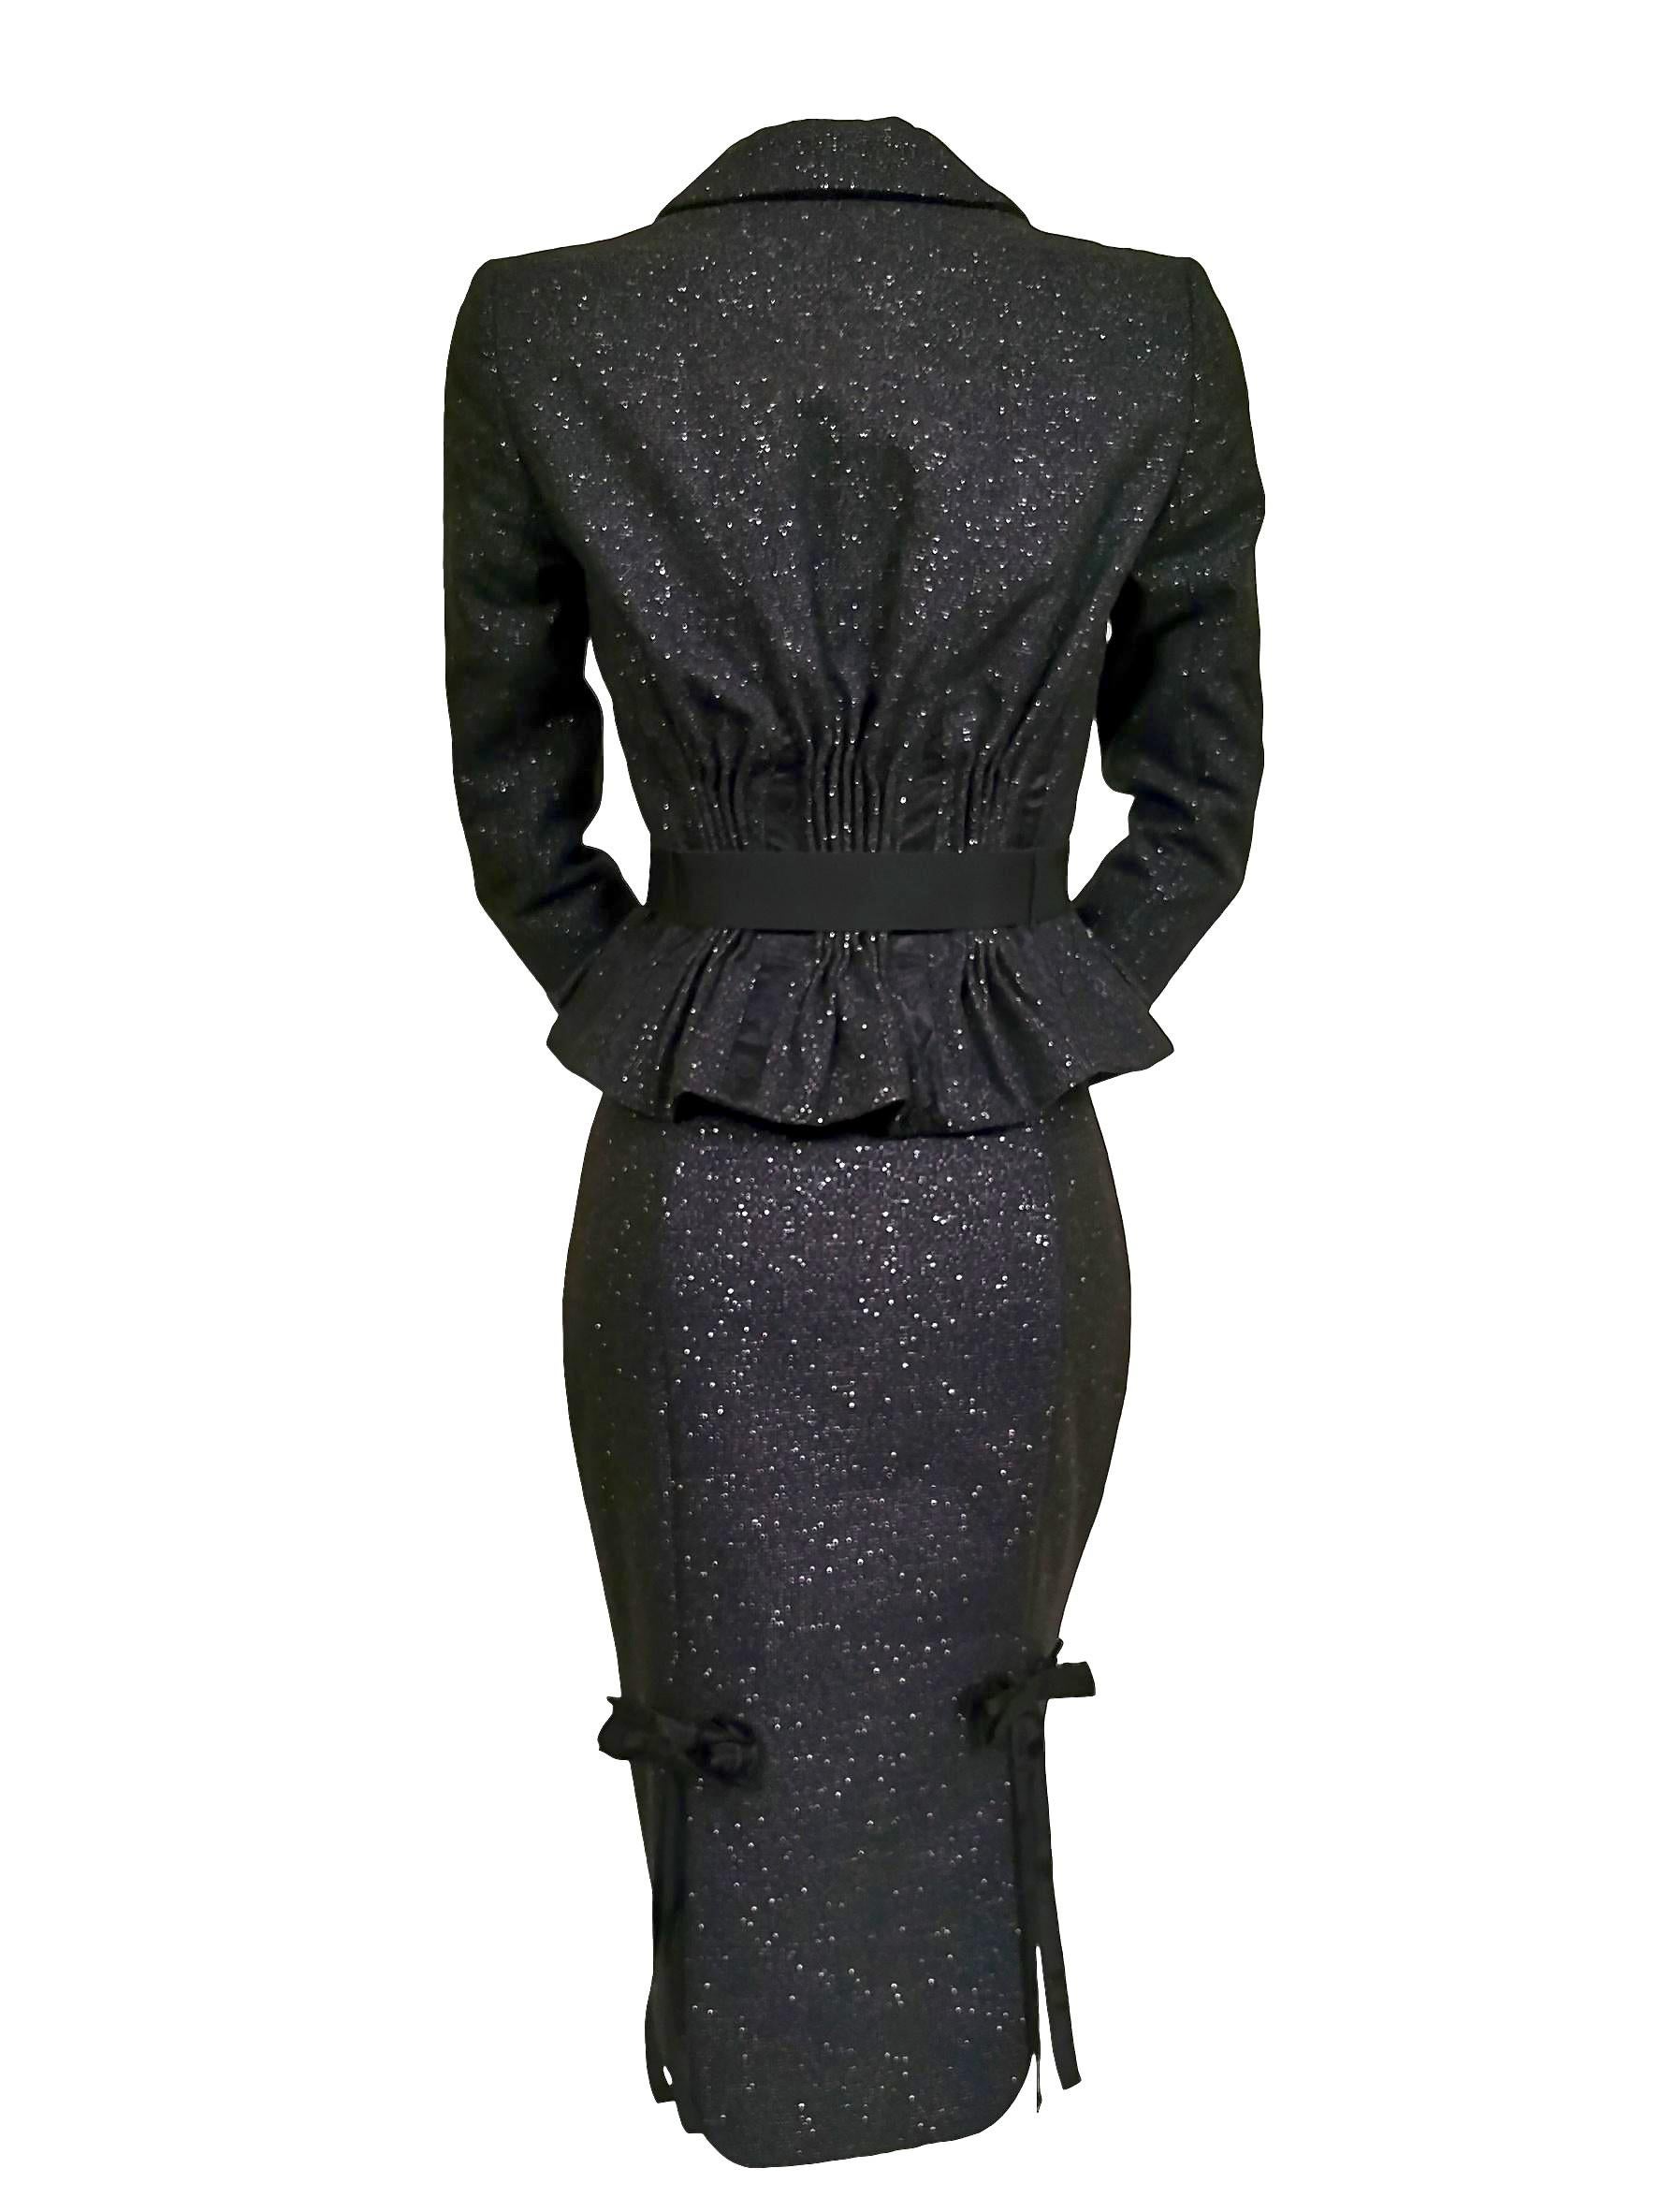 John Galliano Wool/Cashmere, Lace and Ribbon Skirt Suit A/W 2011 For Sale 2